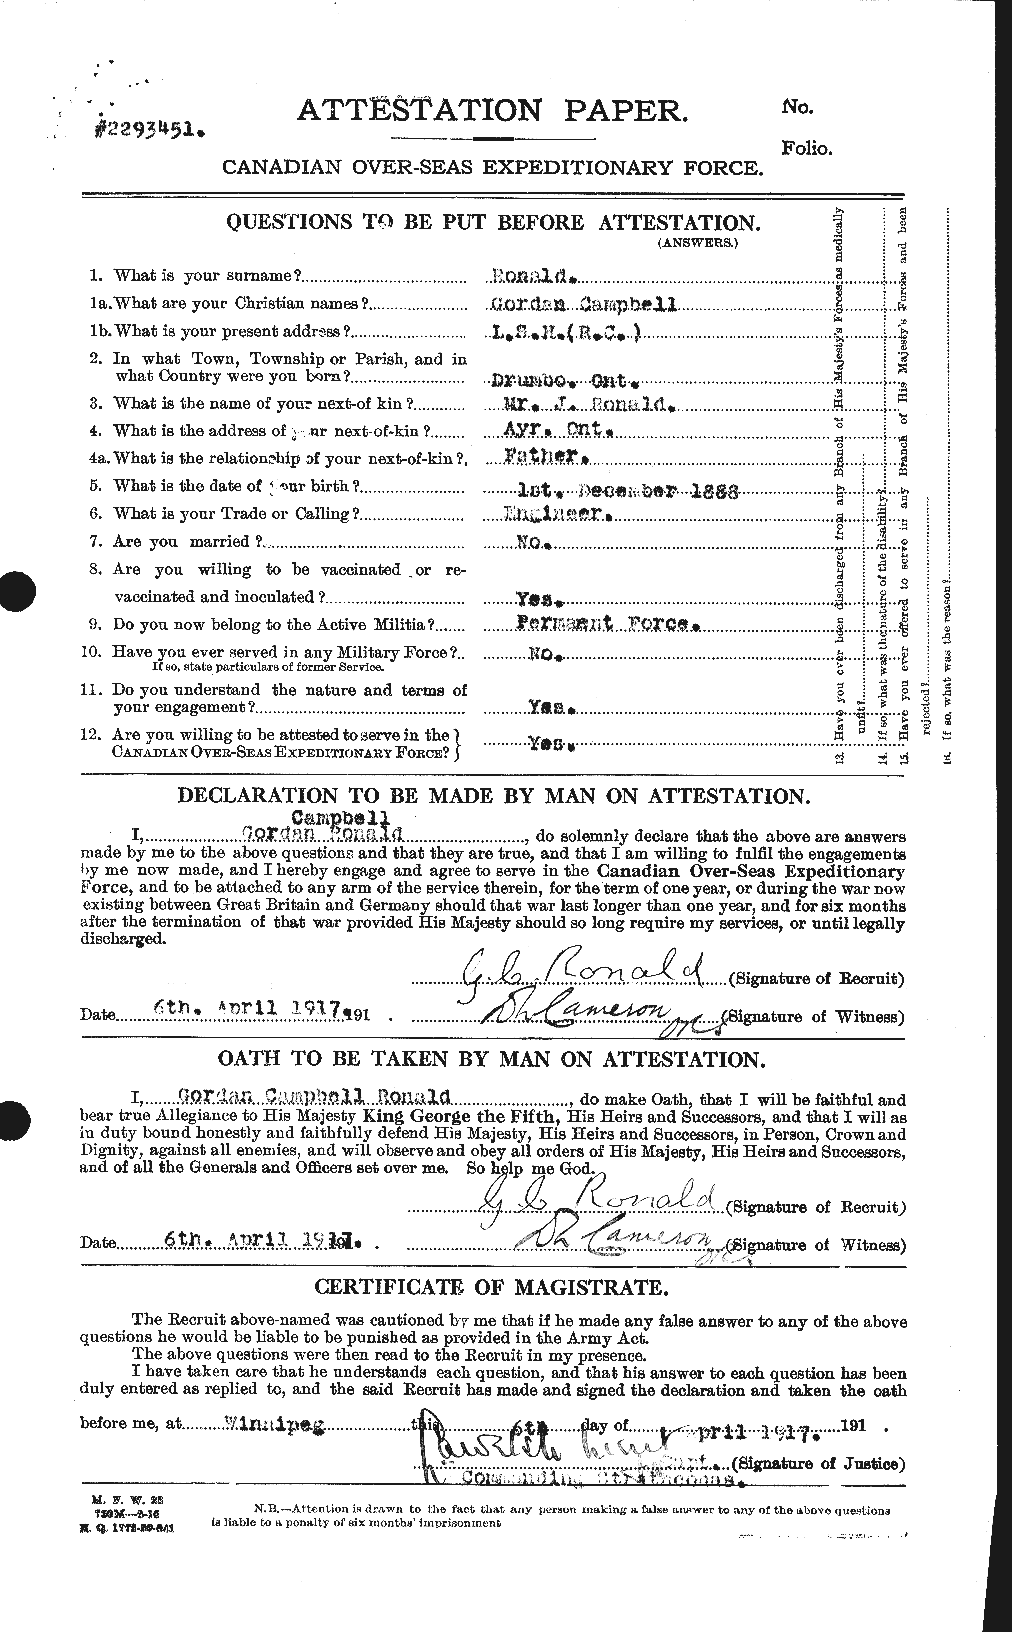 Personnel Records of the First World War - CEF 613670a